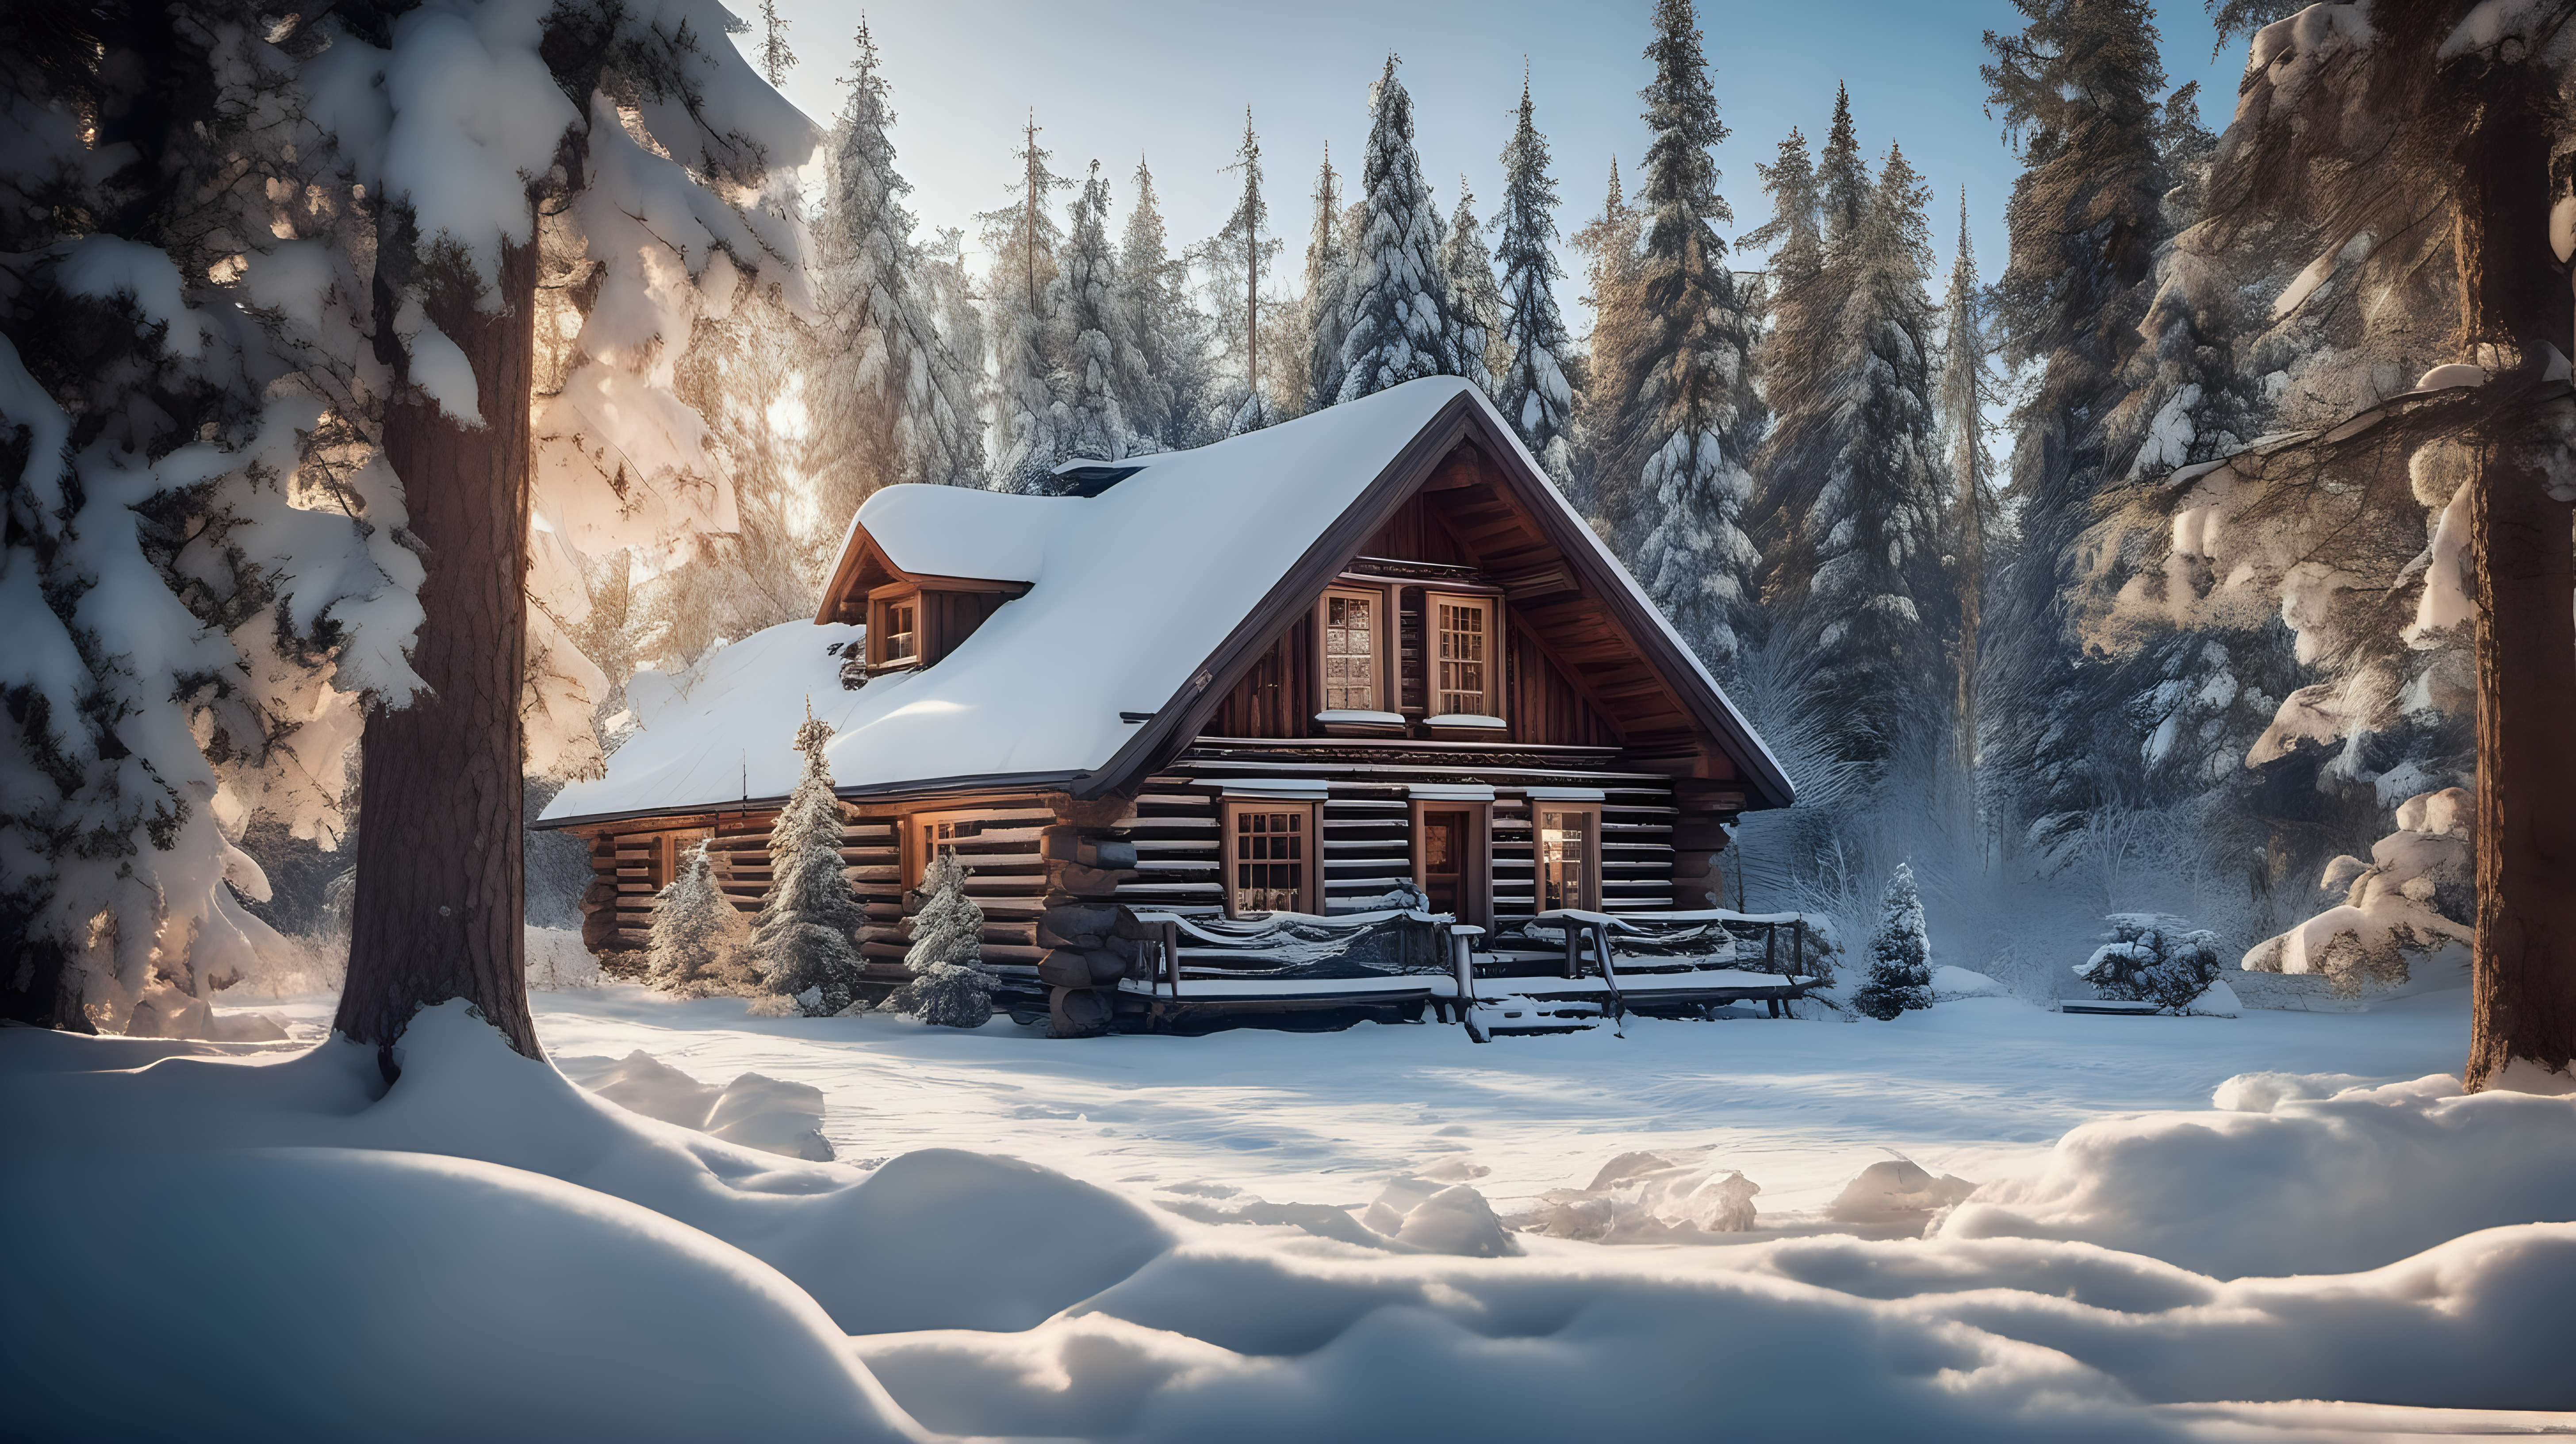 A cozy snowcovered log cabin nestled amidst the